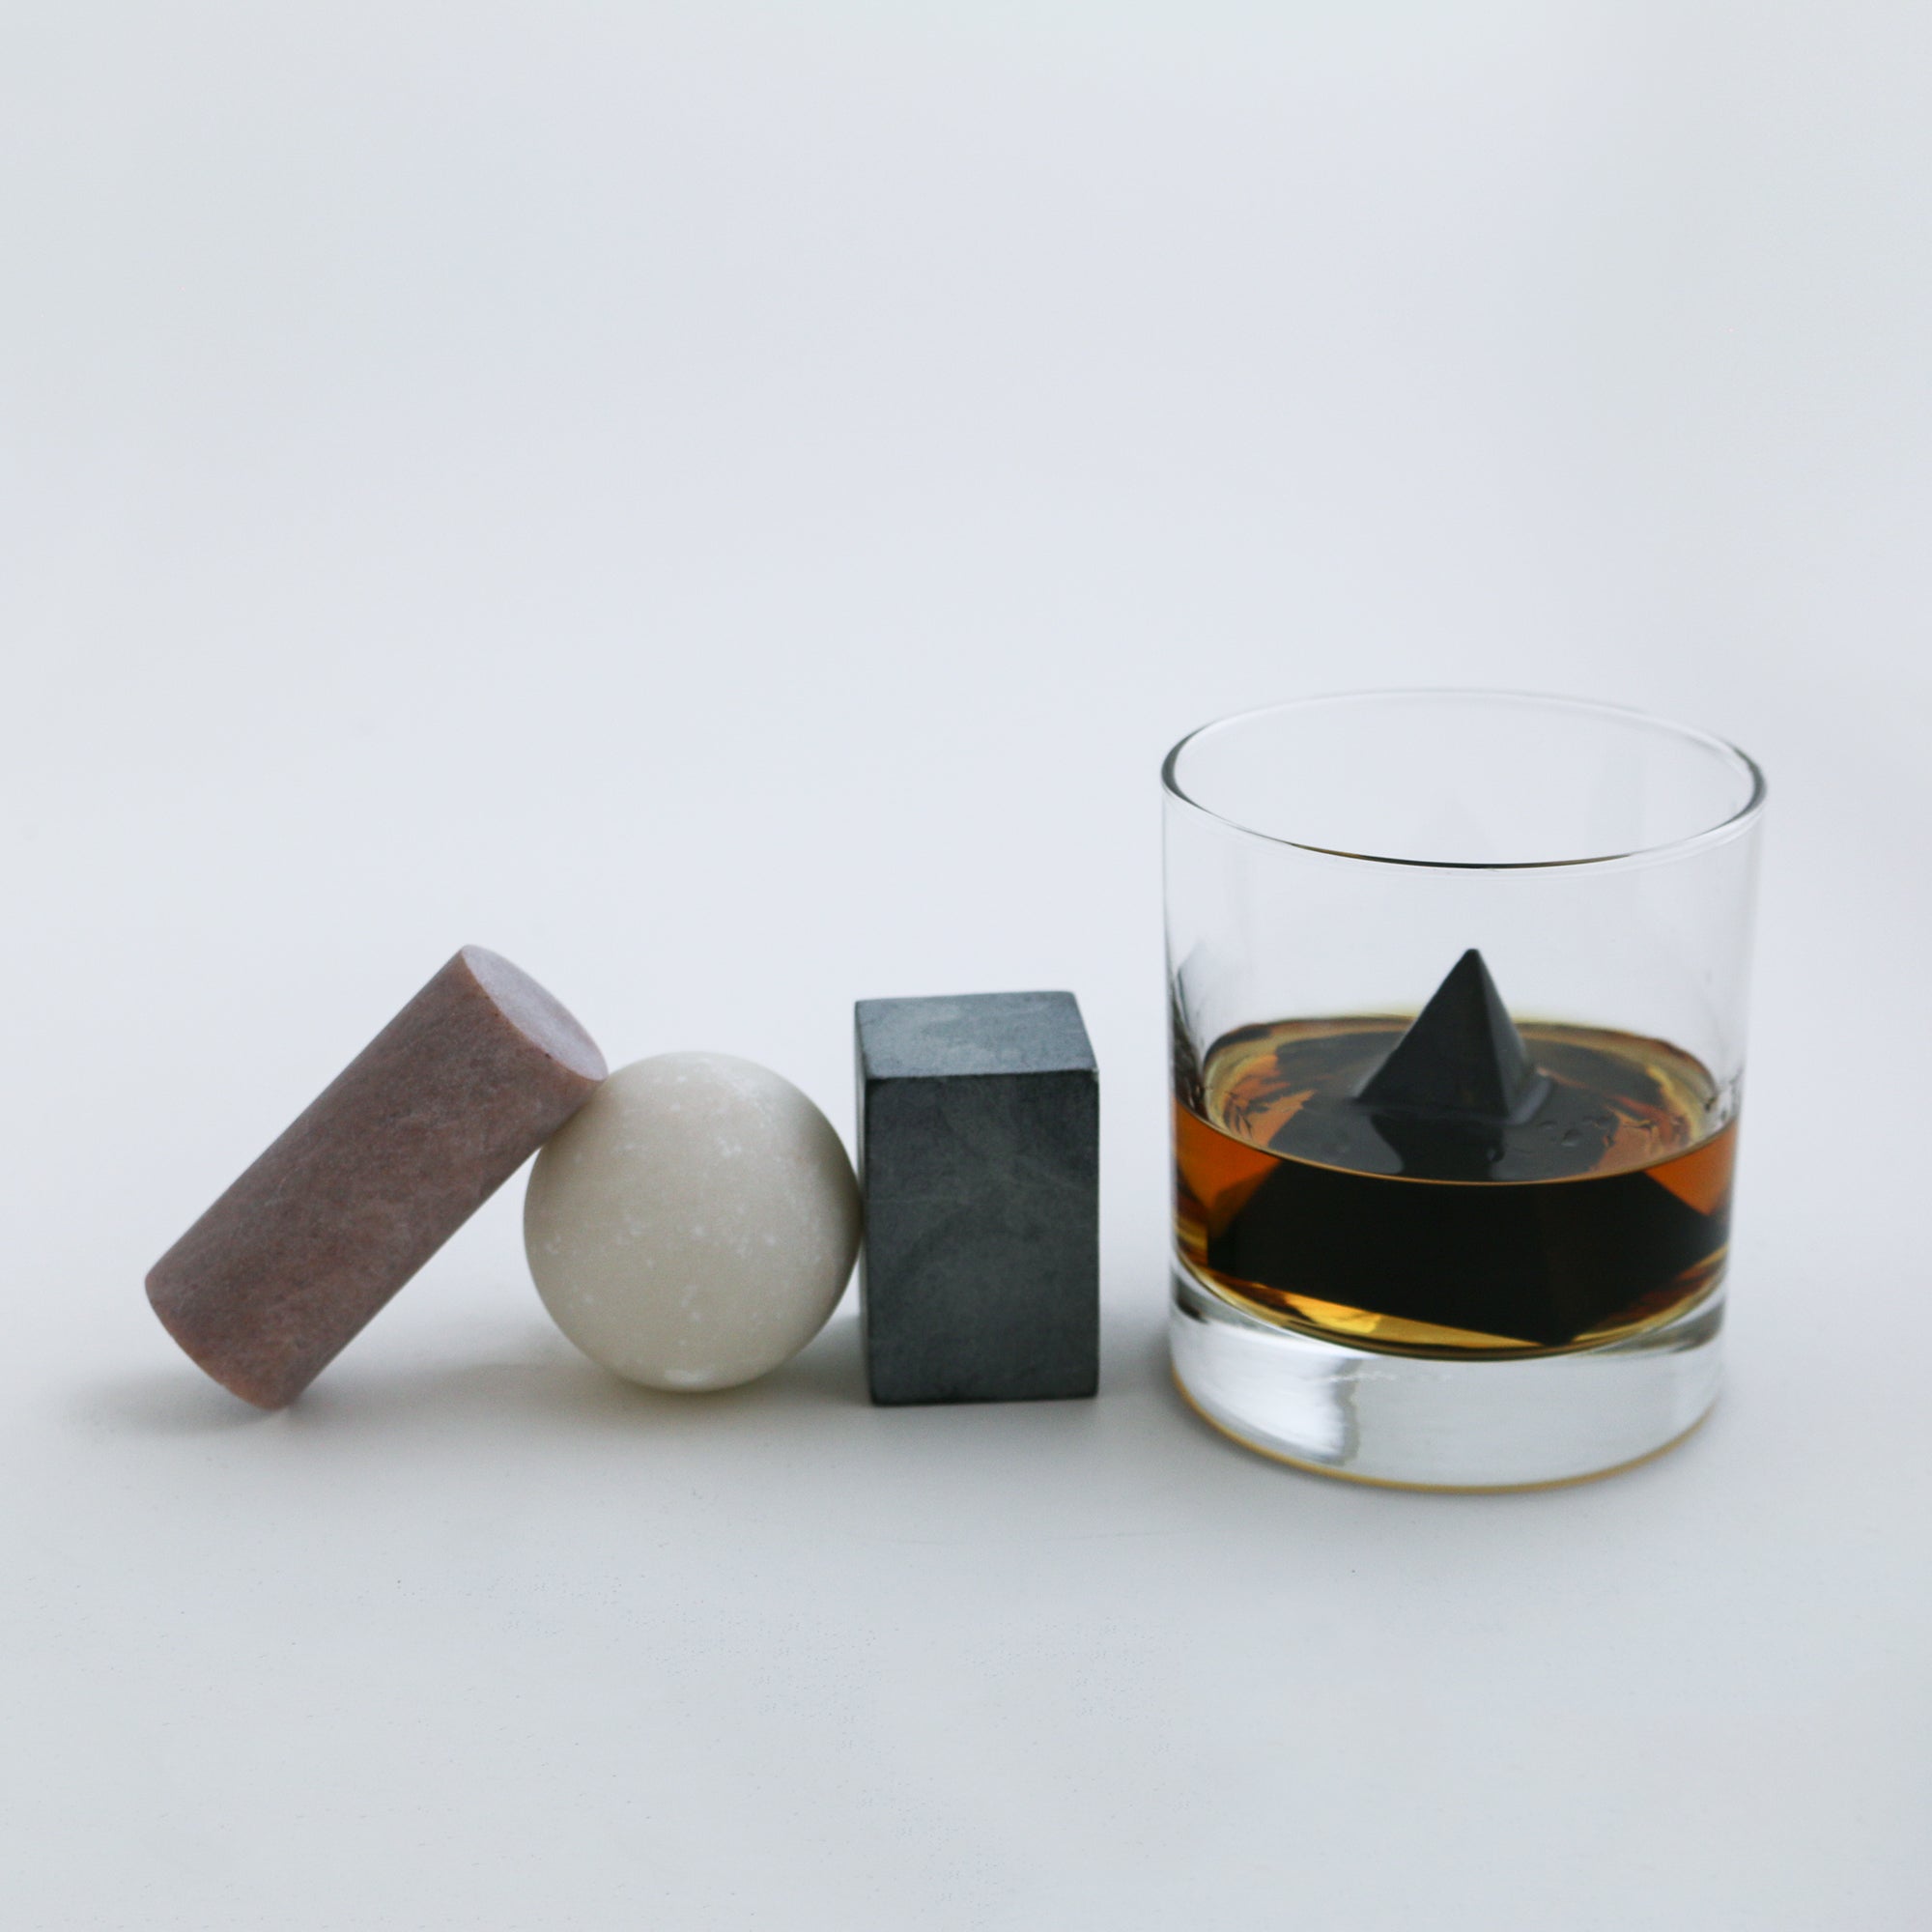 Perfect Sphere Whiskey Rocks, Set of 2